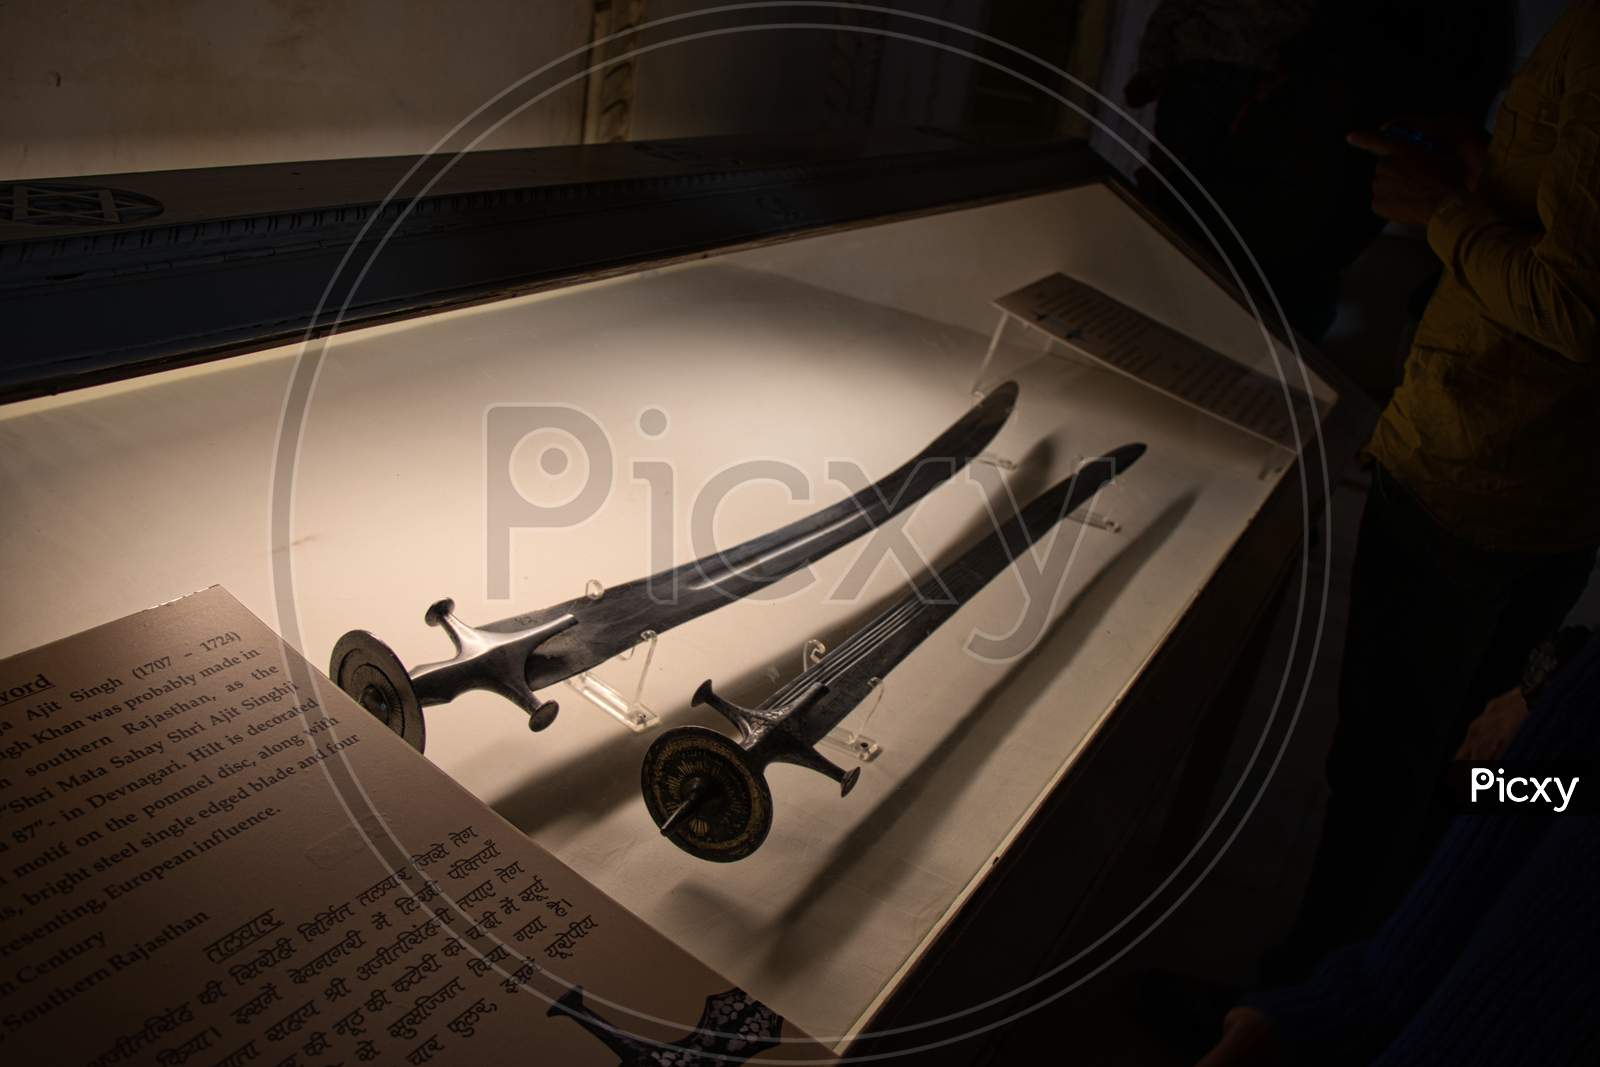 ancient swords of india